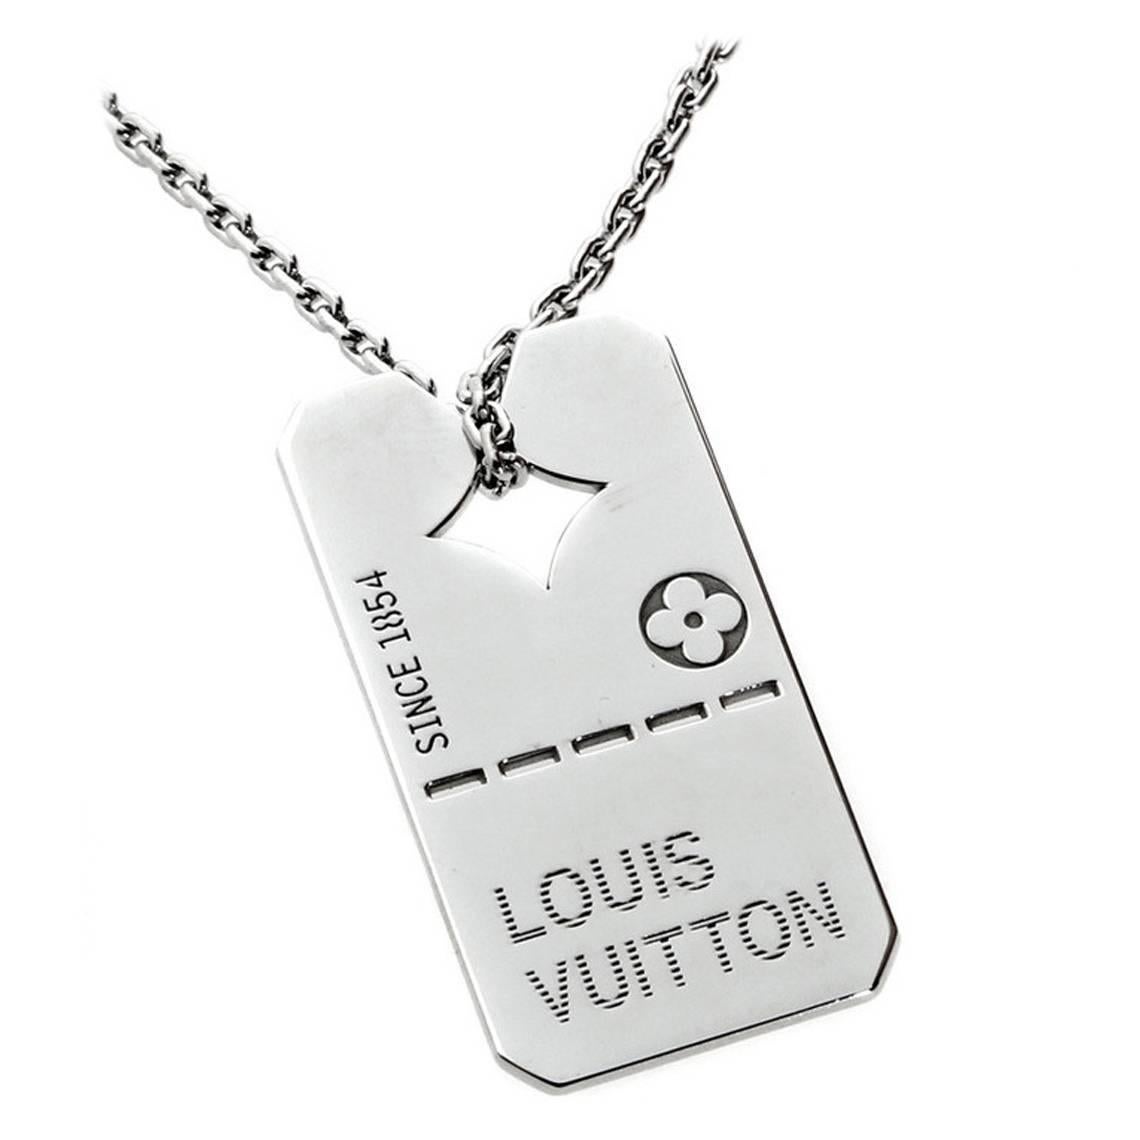 Louis Vuitton Color Blossom Necklace - 5 For Sale on 1stDibs